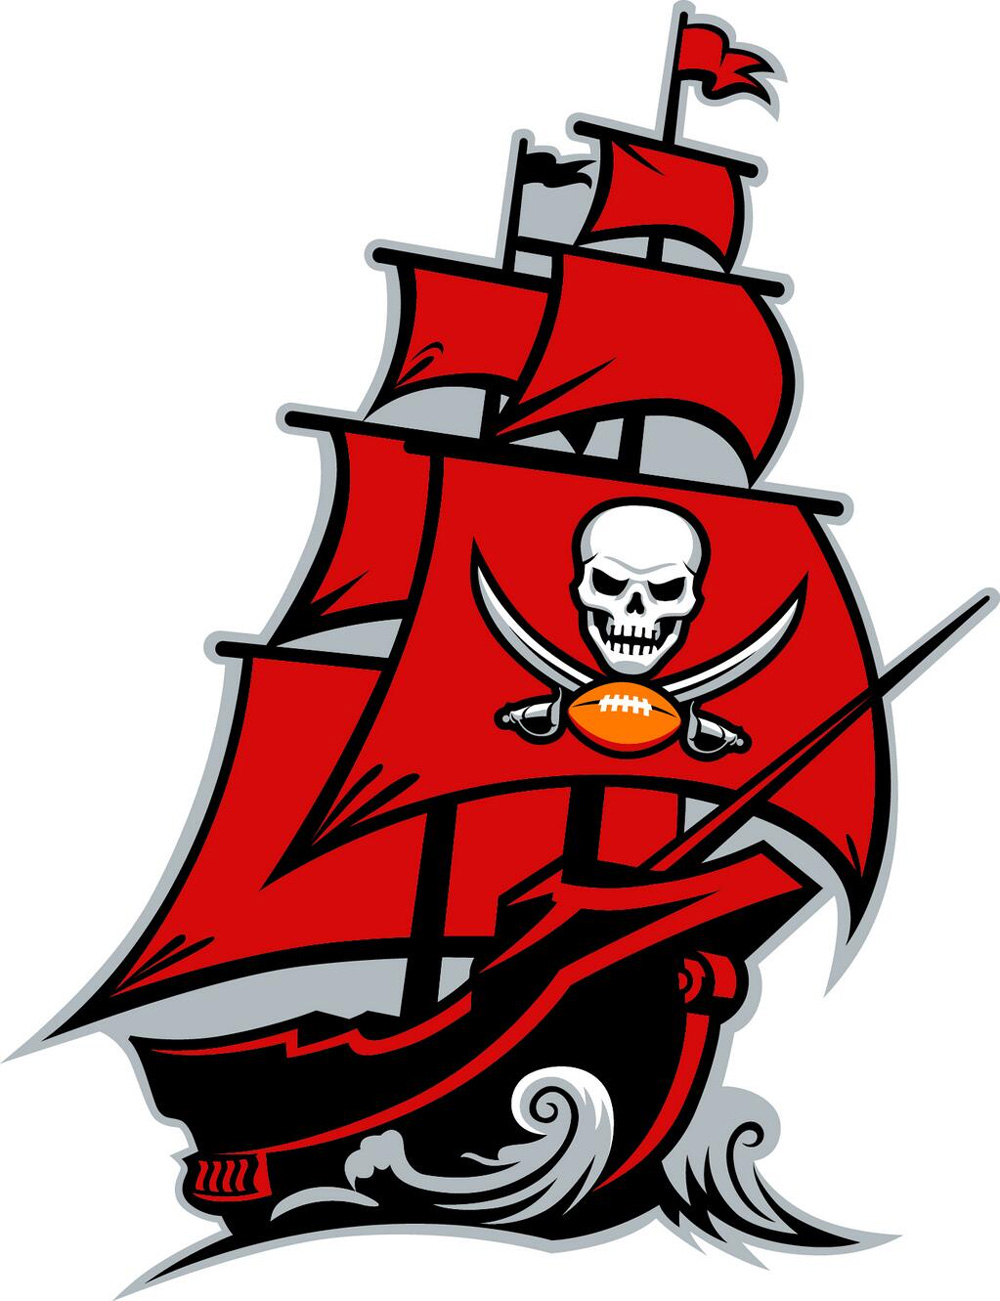 Brand New: New Logo, Identity, and Helmet for Tampa Bay Buccaneers